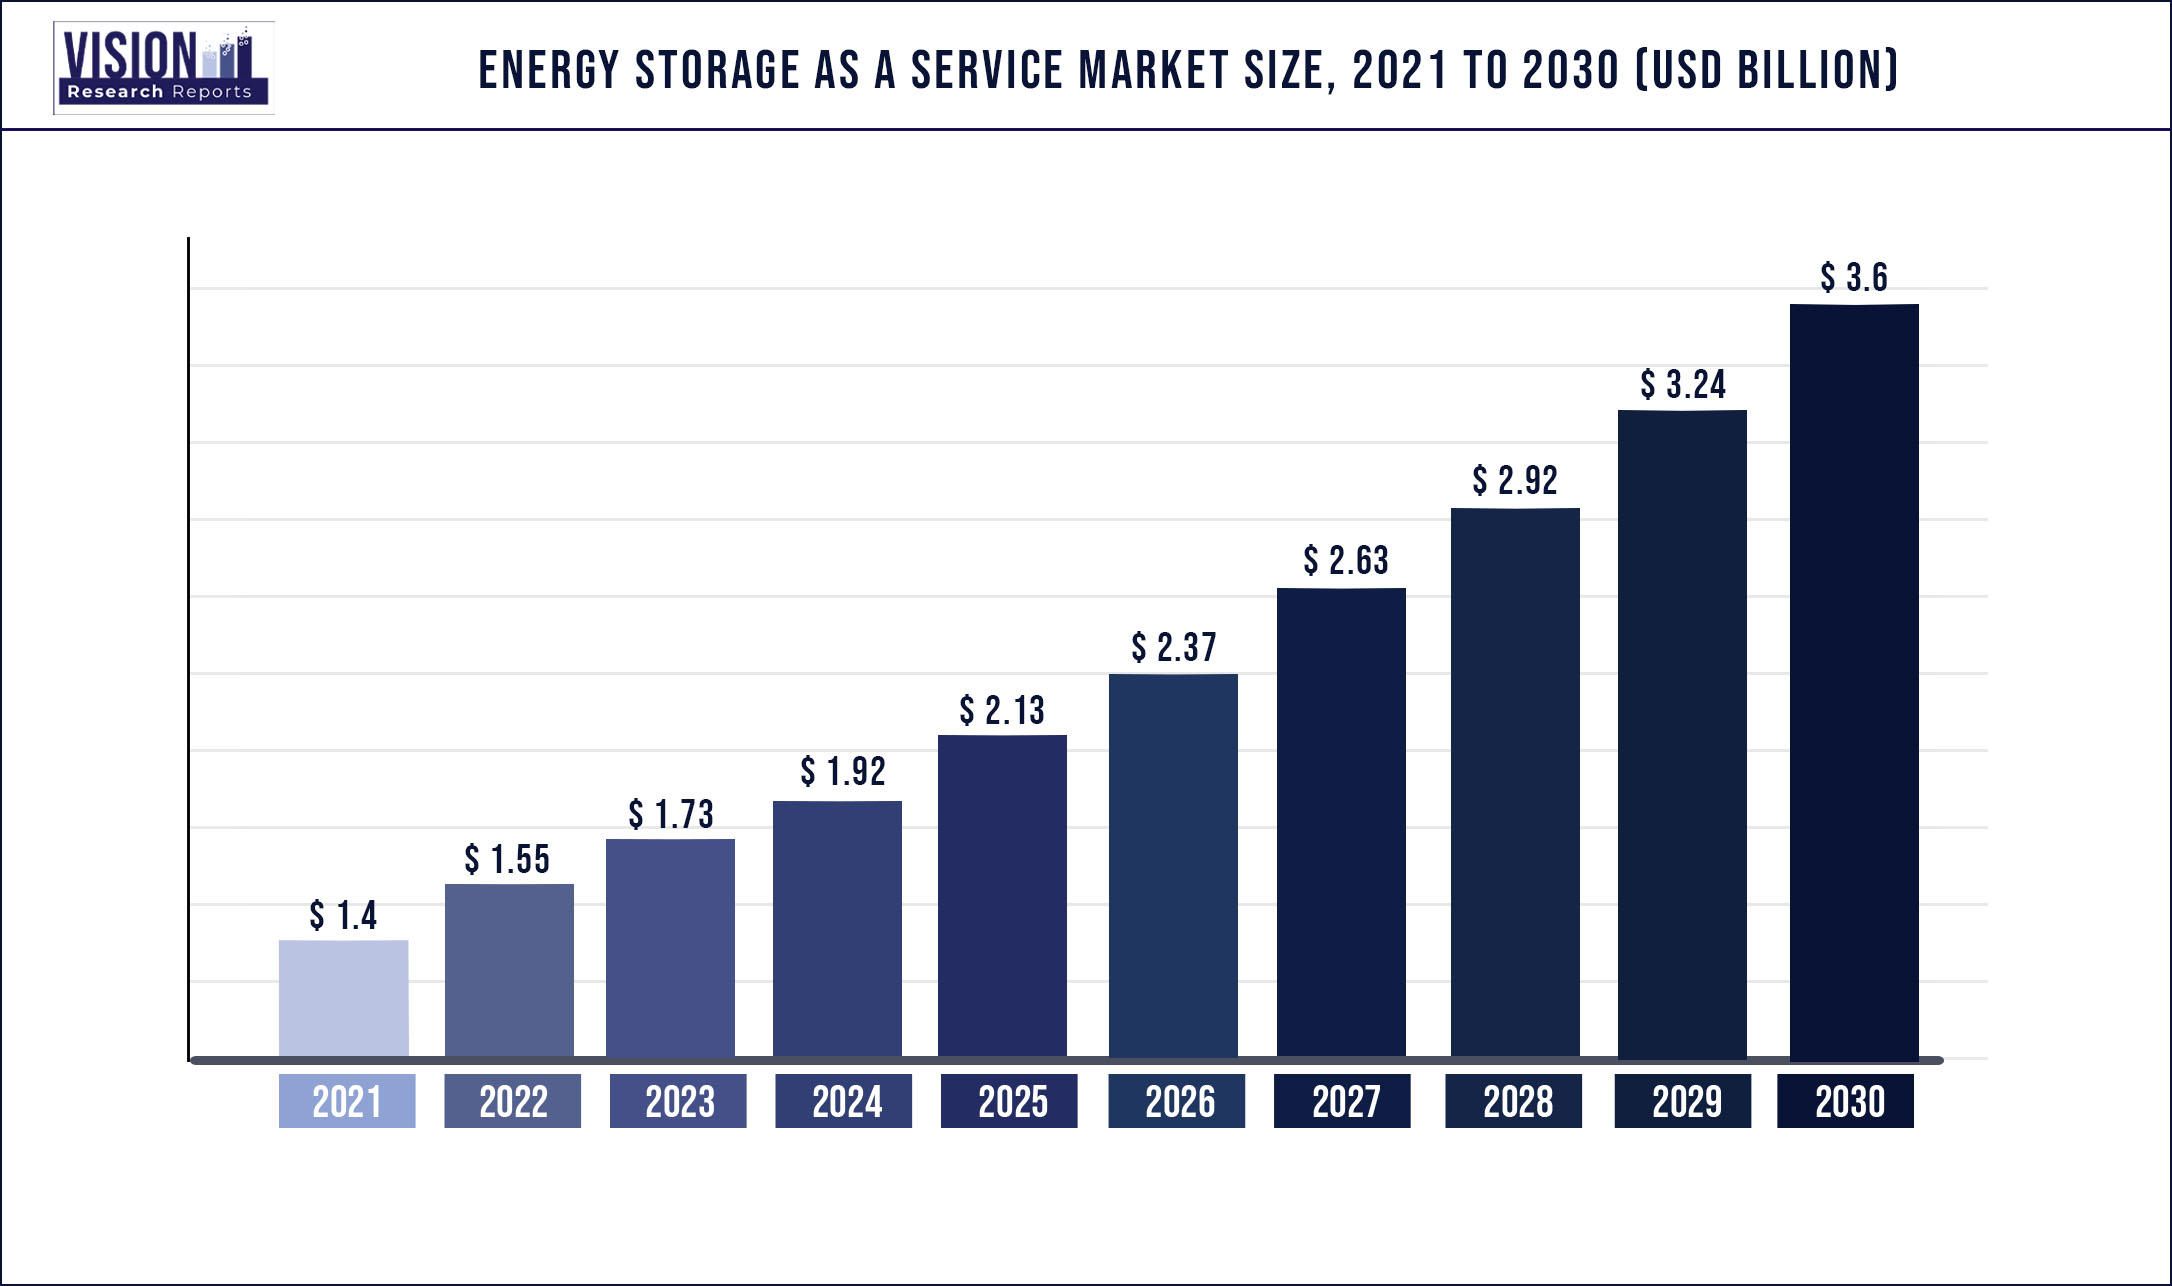 Energy Storage As A Service Market Size 2021 to 2030